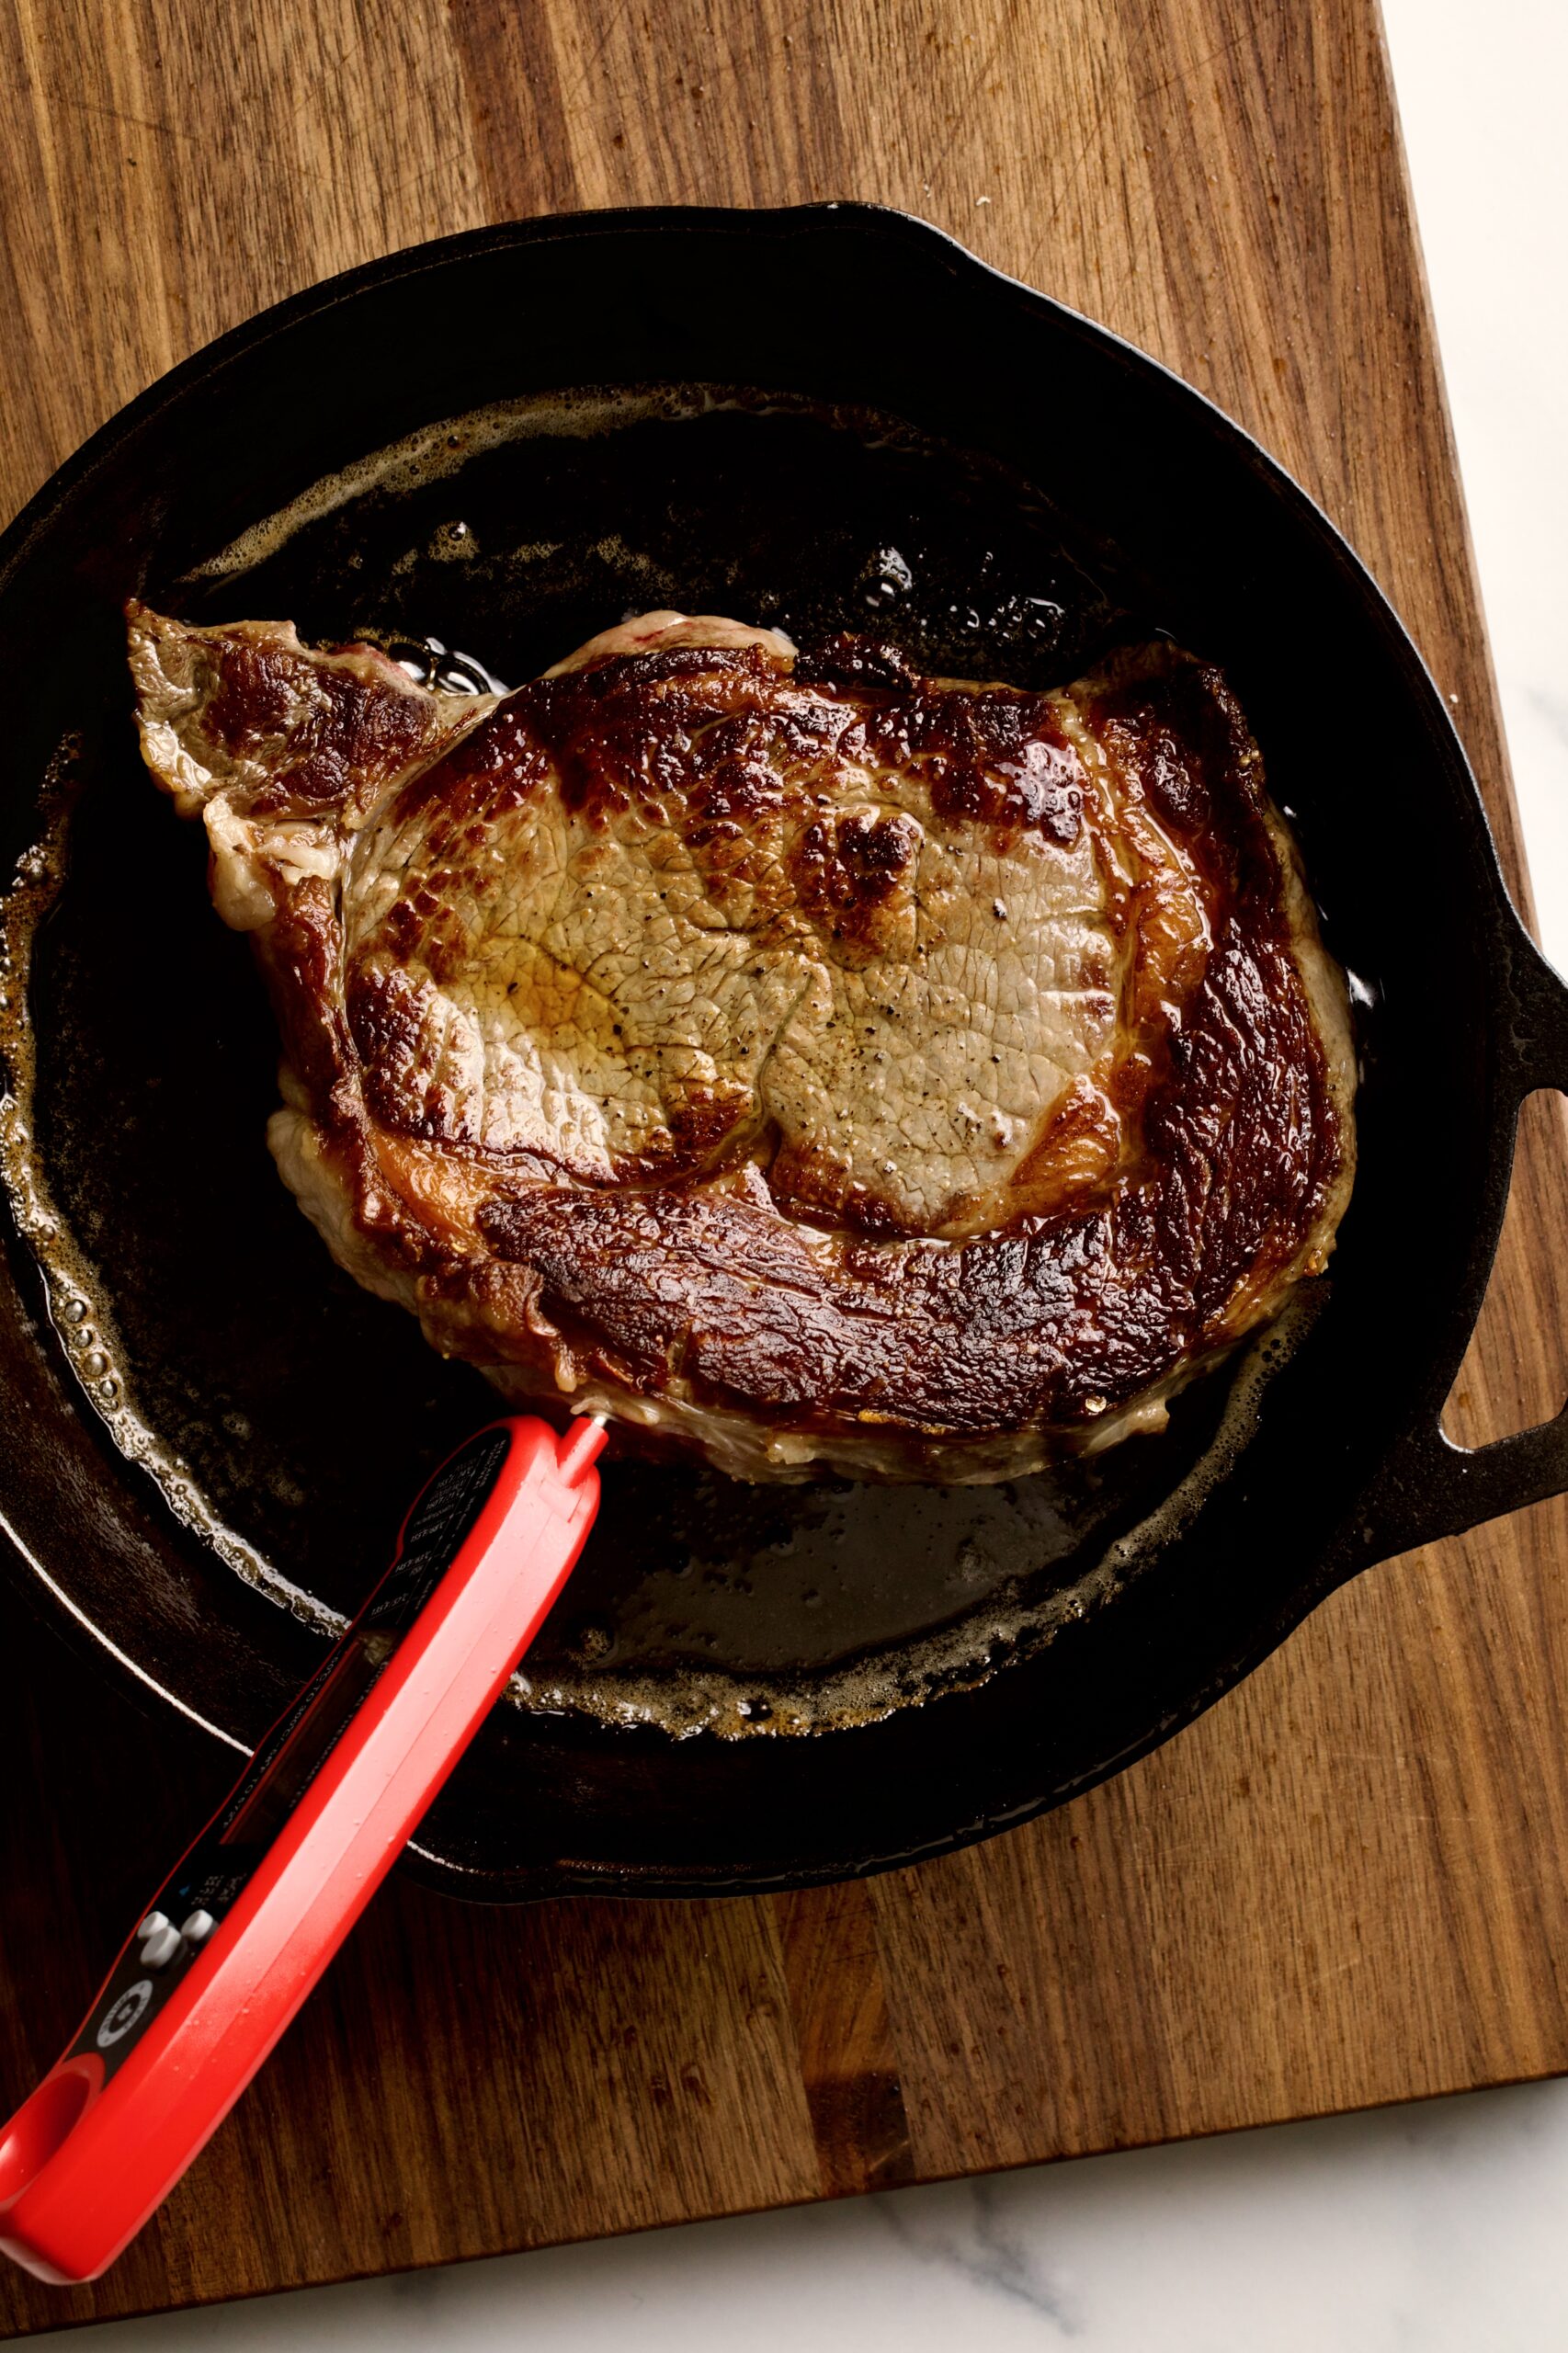 How to Cook Steak in a Pan (Perfect Recipe)- steak cooking a pan using a meat thermometer to check for doneness.